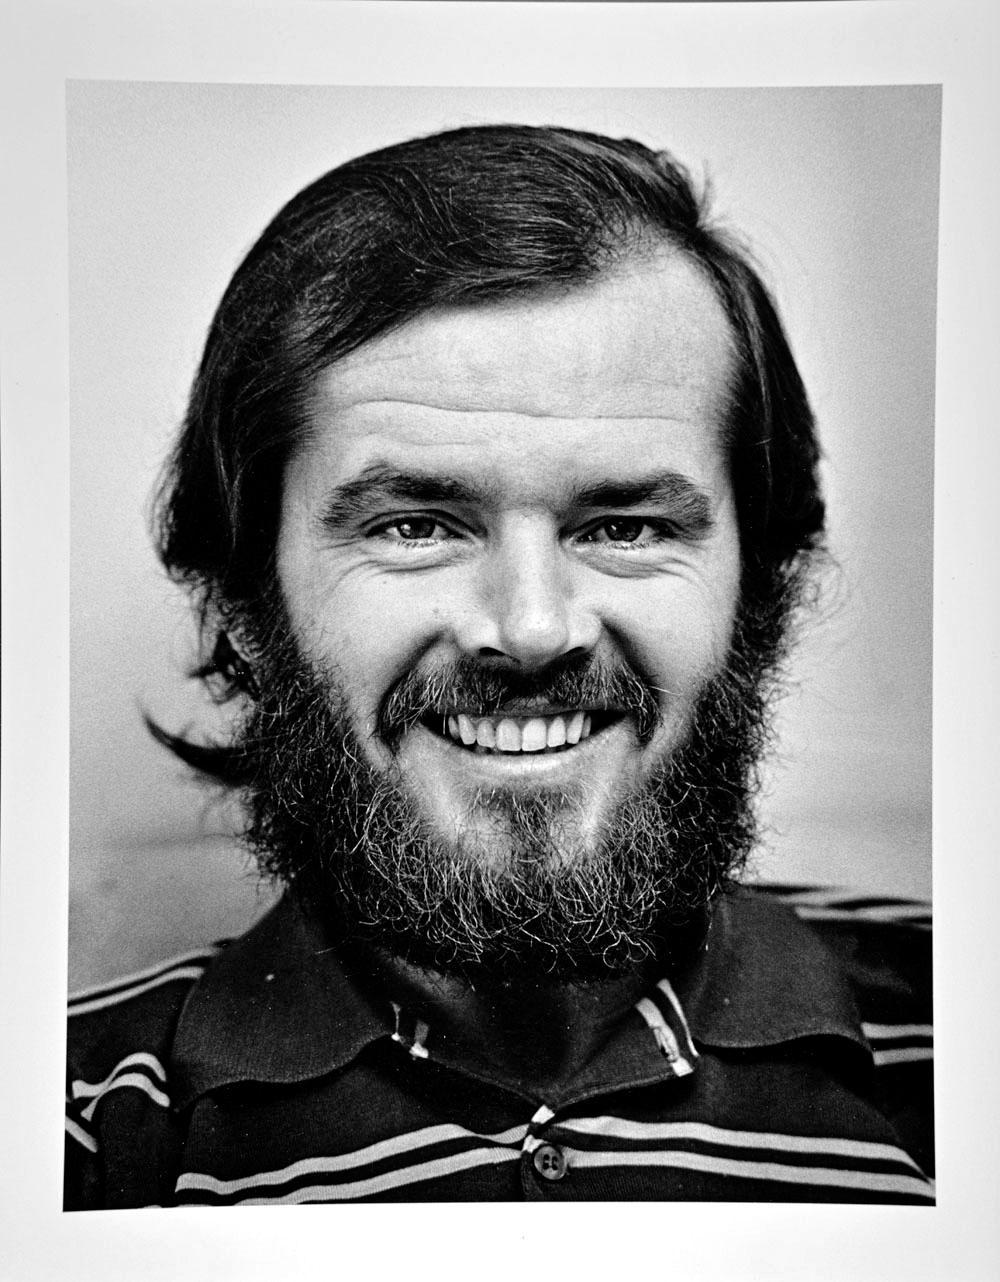 Jack Mitchell Black and White Photograph - Academy Award-winning Actor Jack Nicholson, the year he starred in 'Easy Rider' 